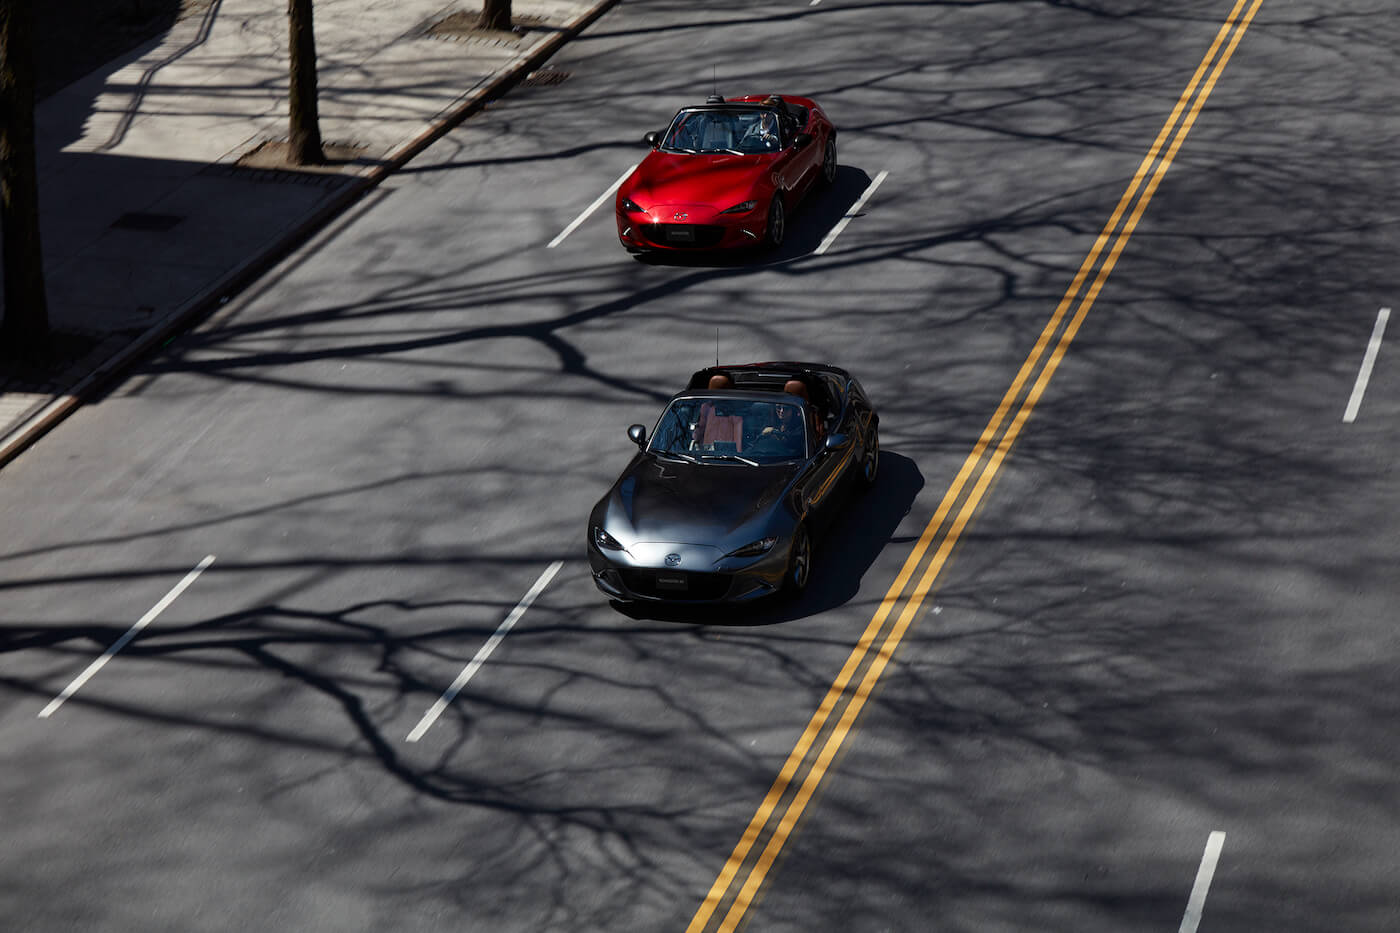 Two Mazda MX-5 Miata (one gray, the other black) models on a city street.